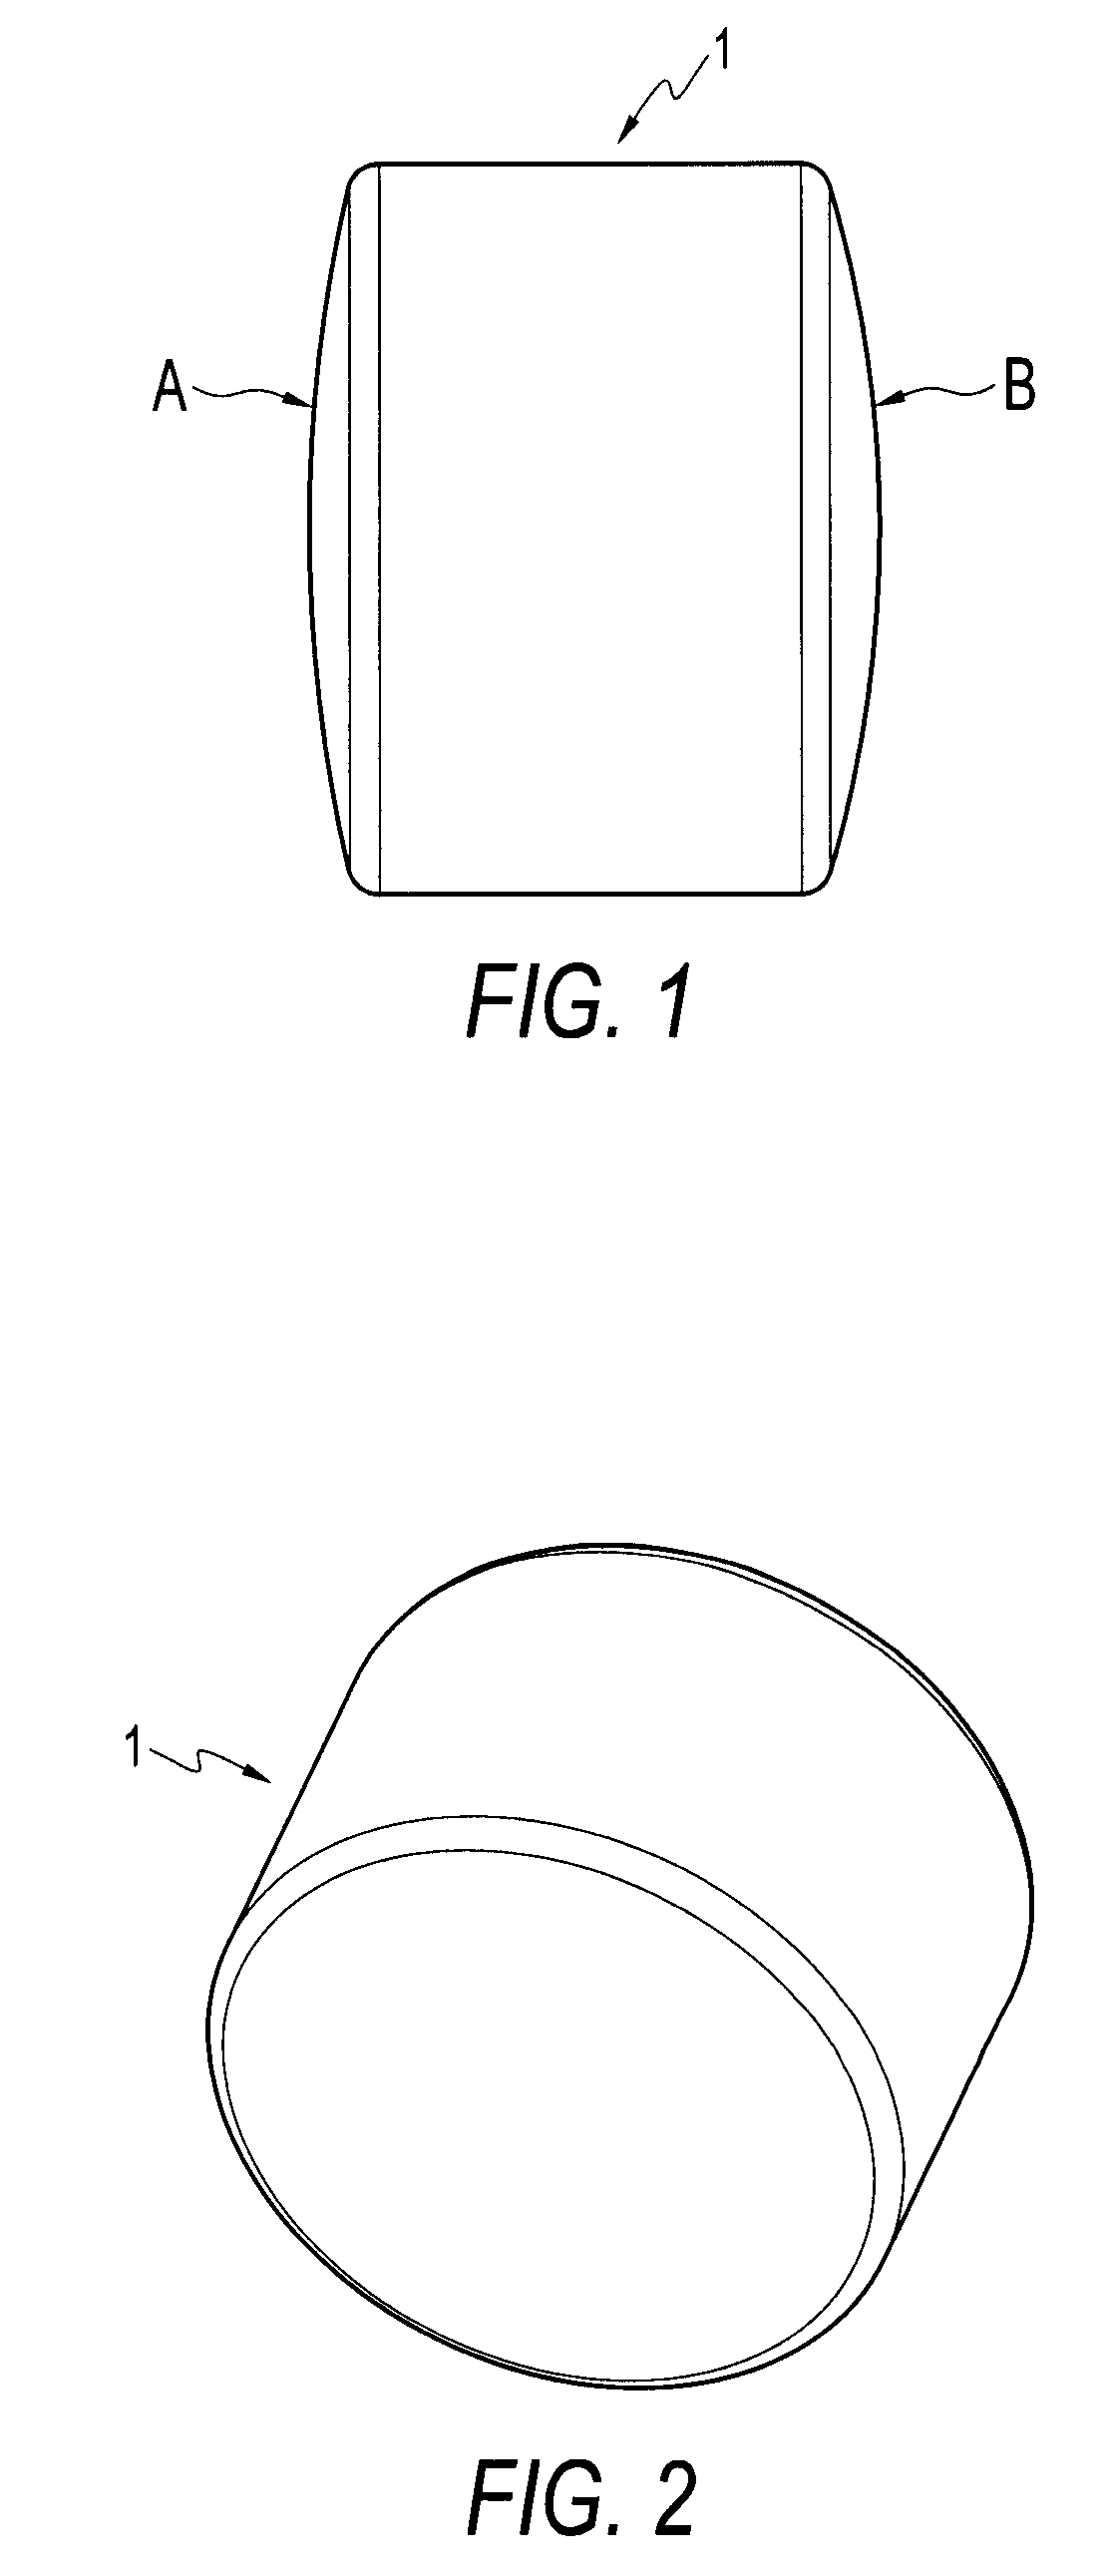 Preformed implants for osteochondral repair